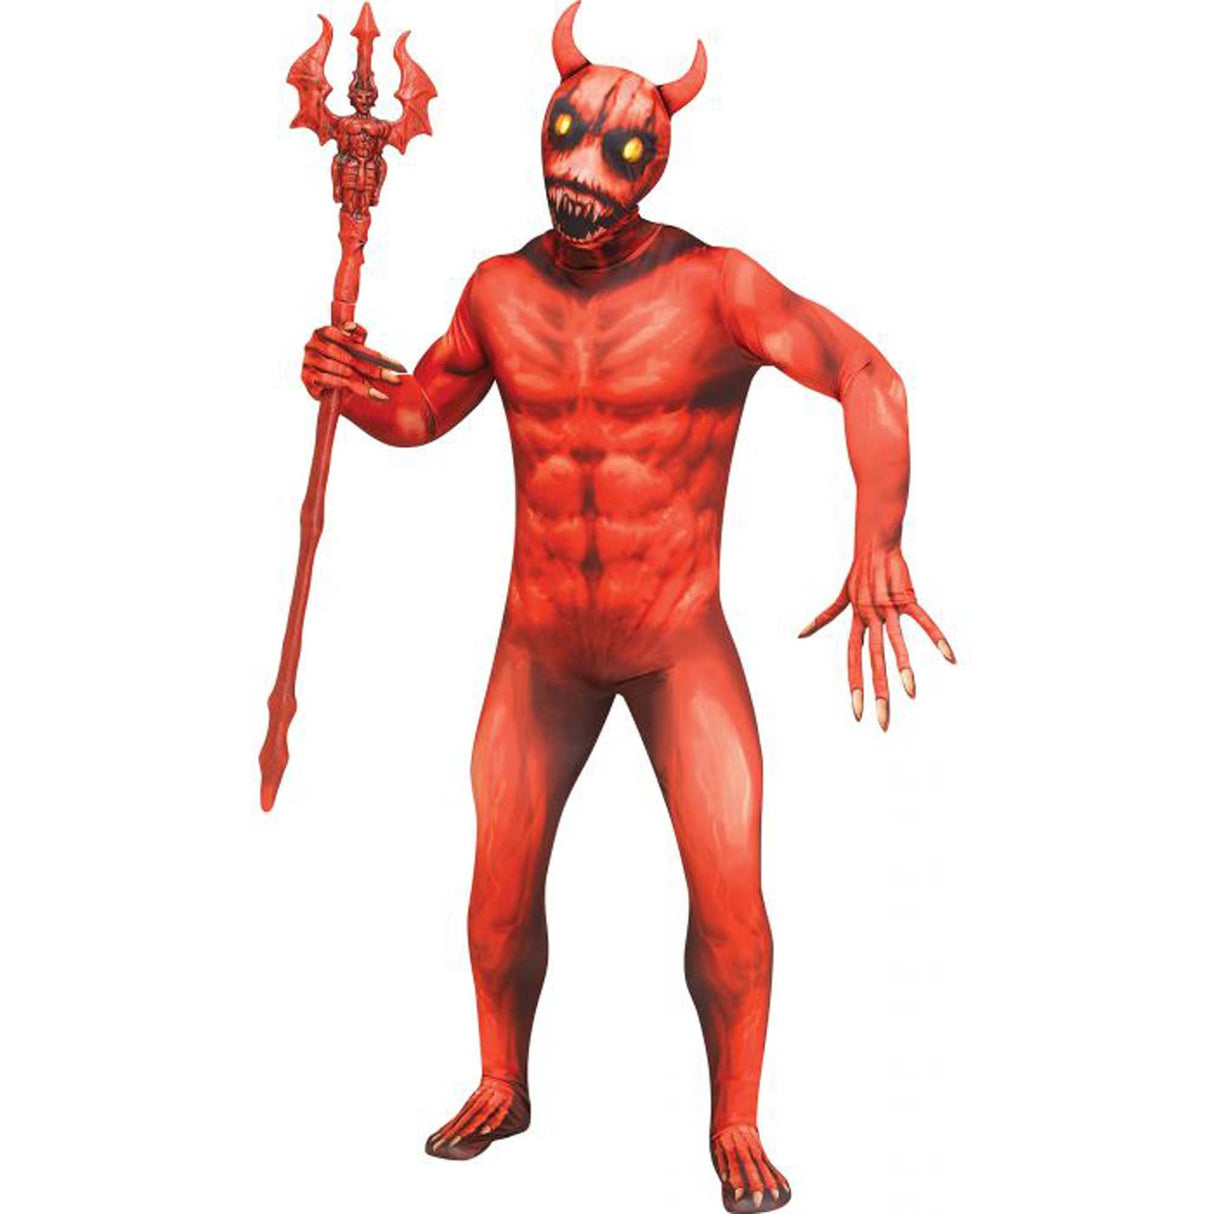 FUN WORLD Costumes Evil Demon Fade Eyes Costume for Adults, Red Jumpsuit 071765144940